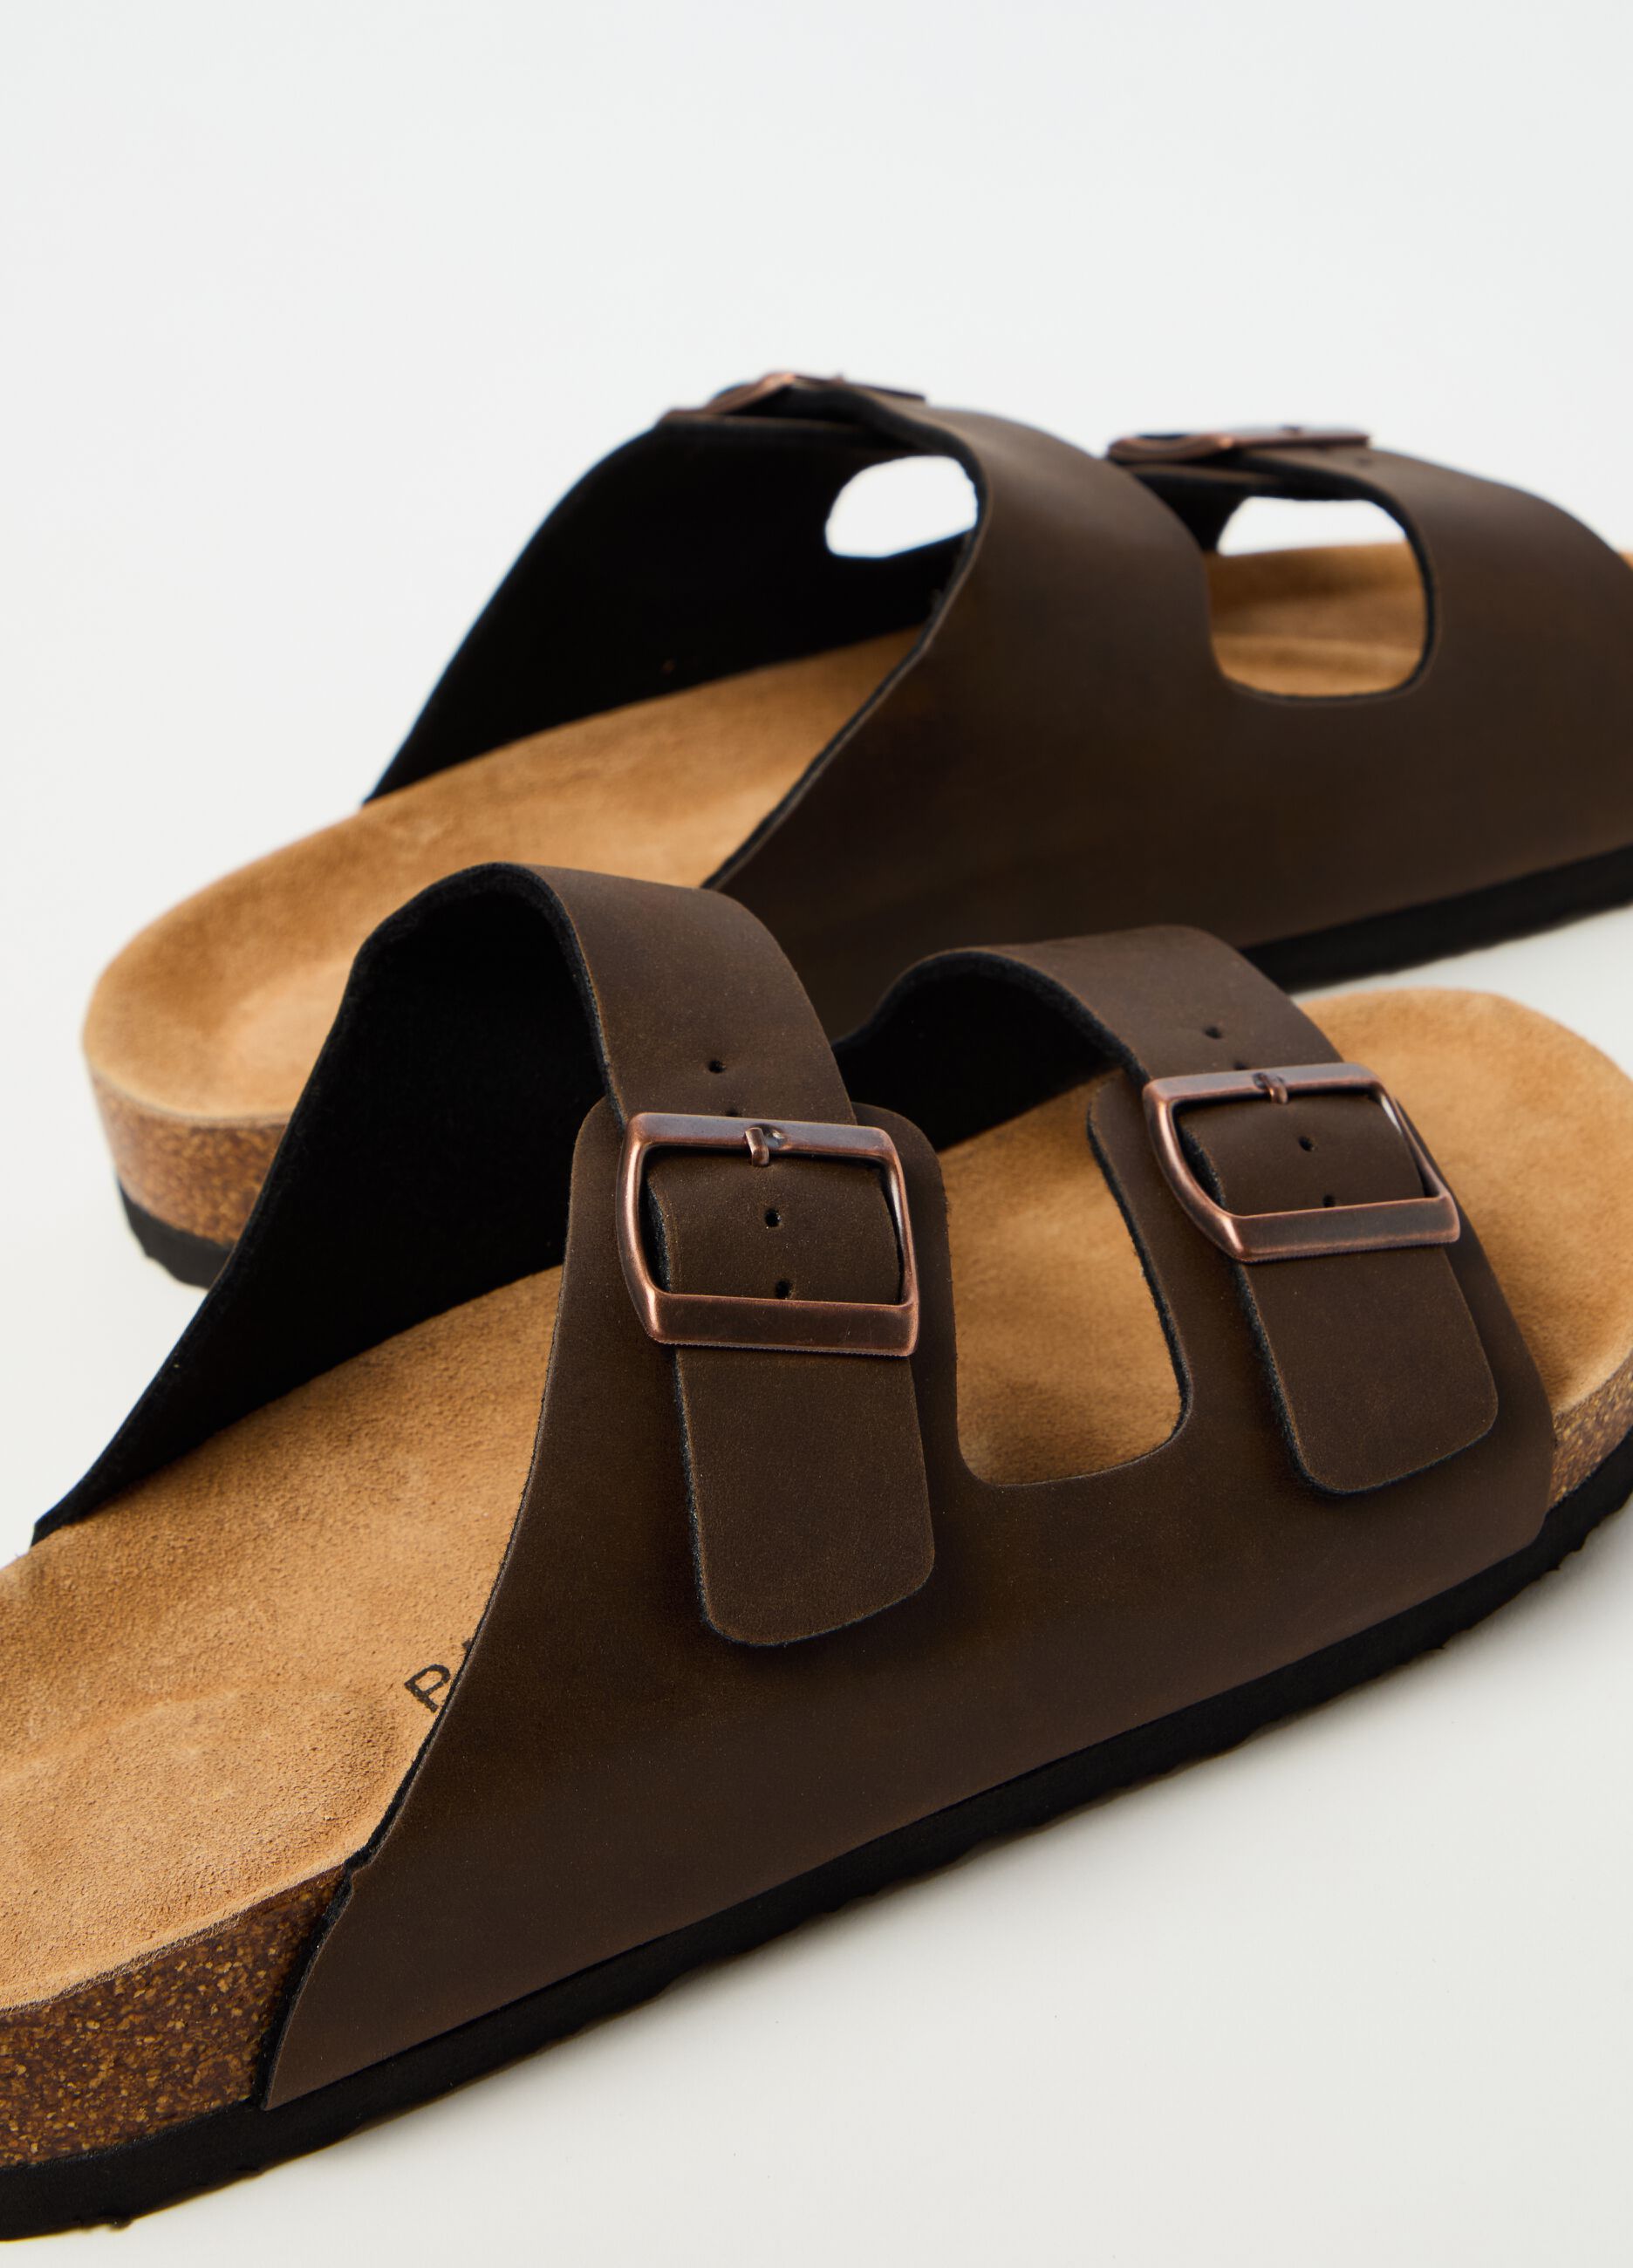 Sandals with double band